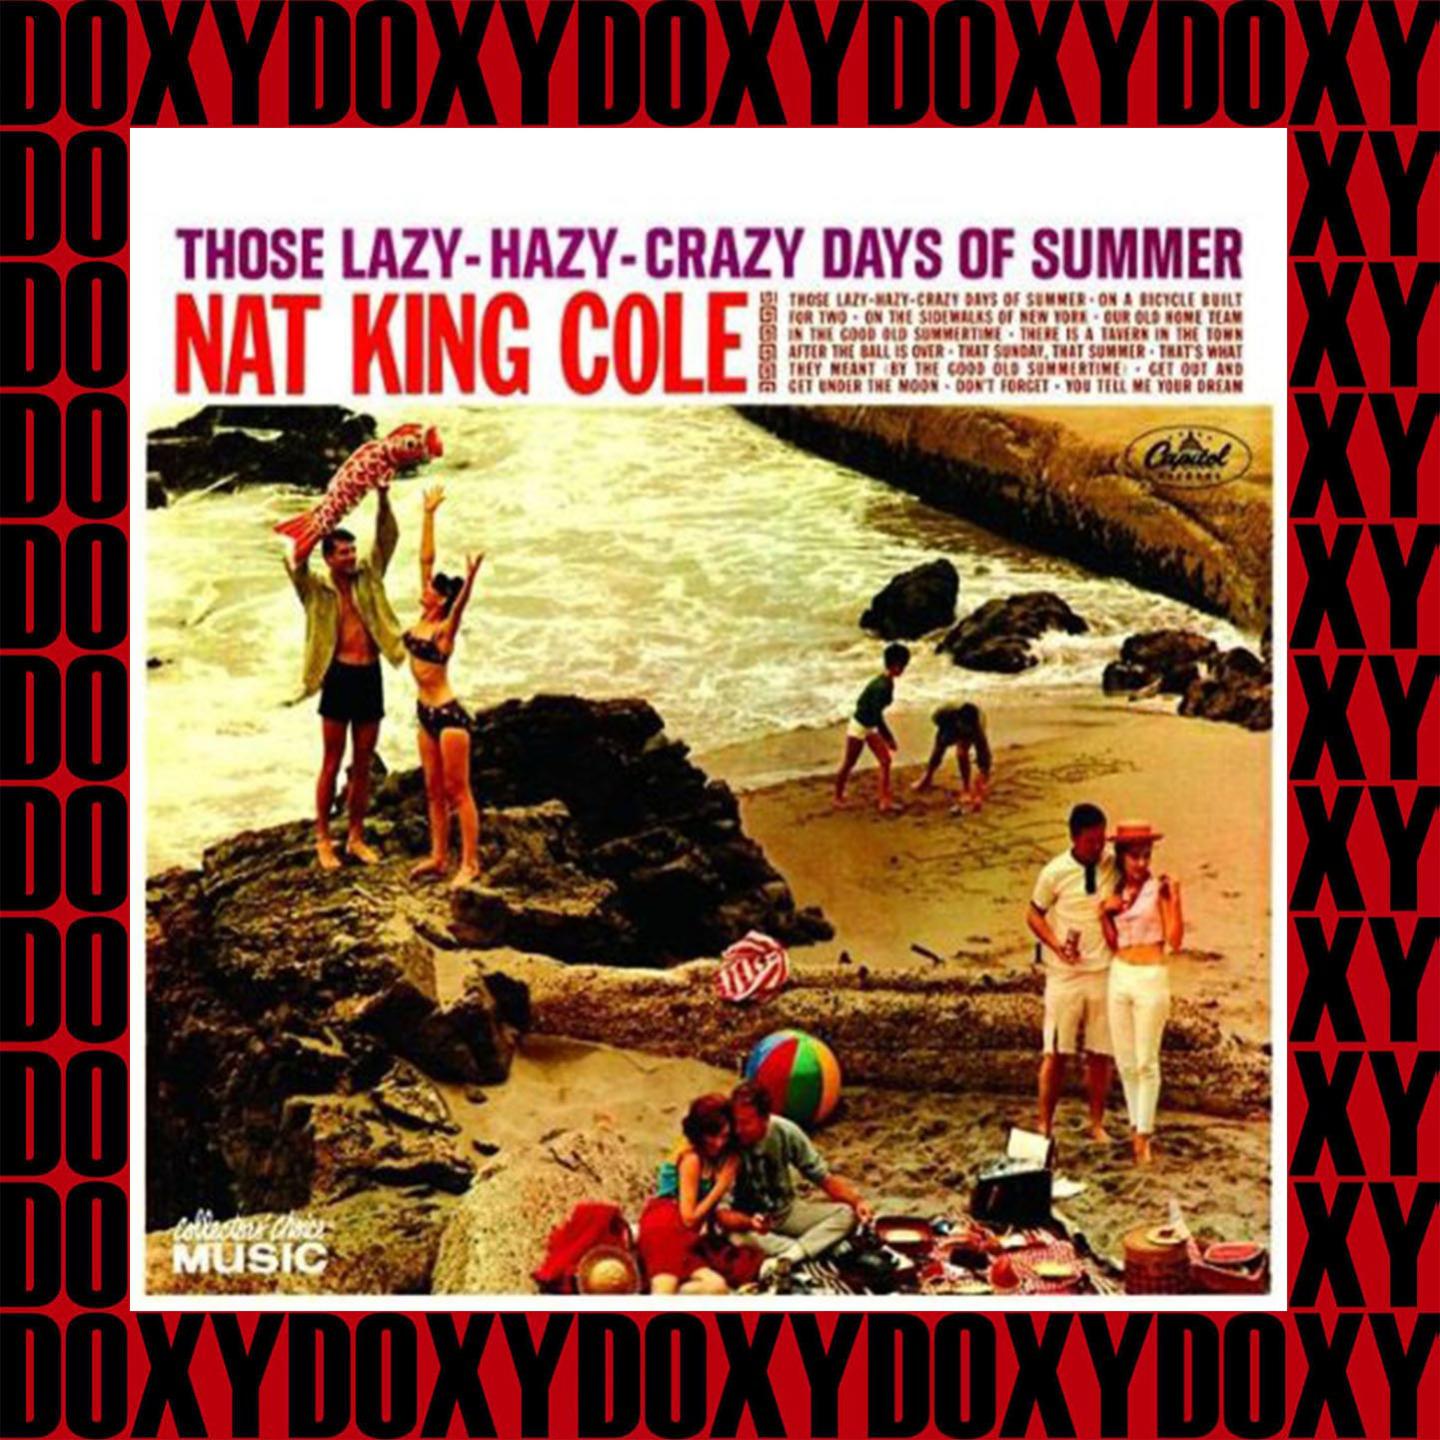 Those Lazy-Hazy-Crazy Days Of Summer (Collector's Choice Music, Remastered Version) (Doxy Collection)